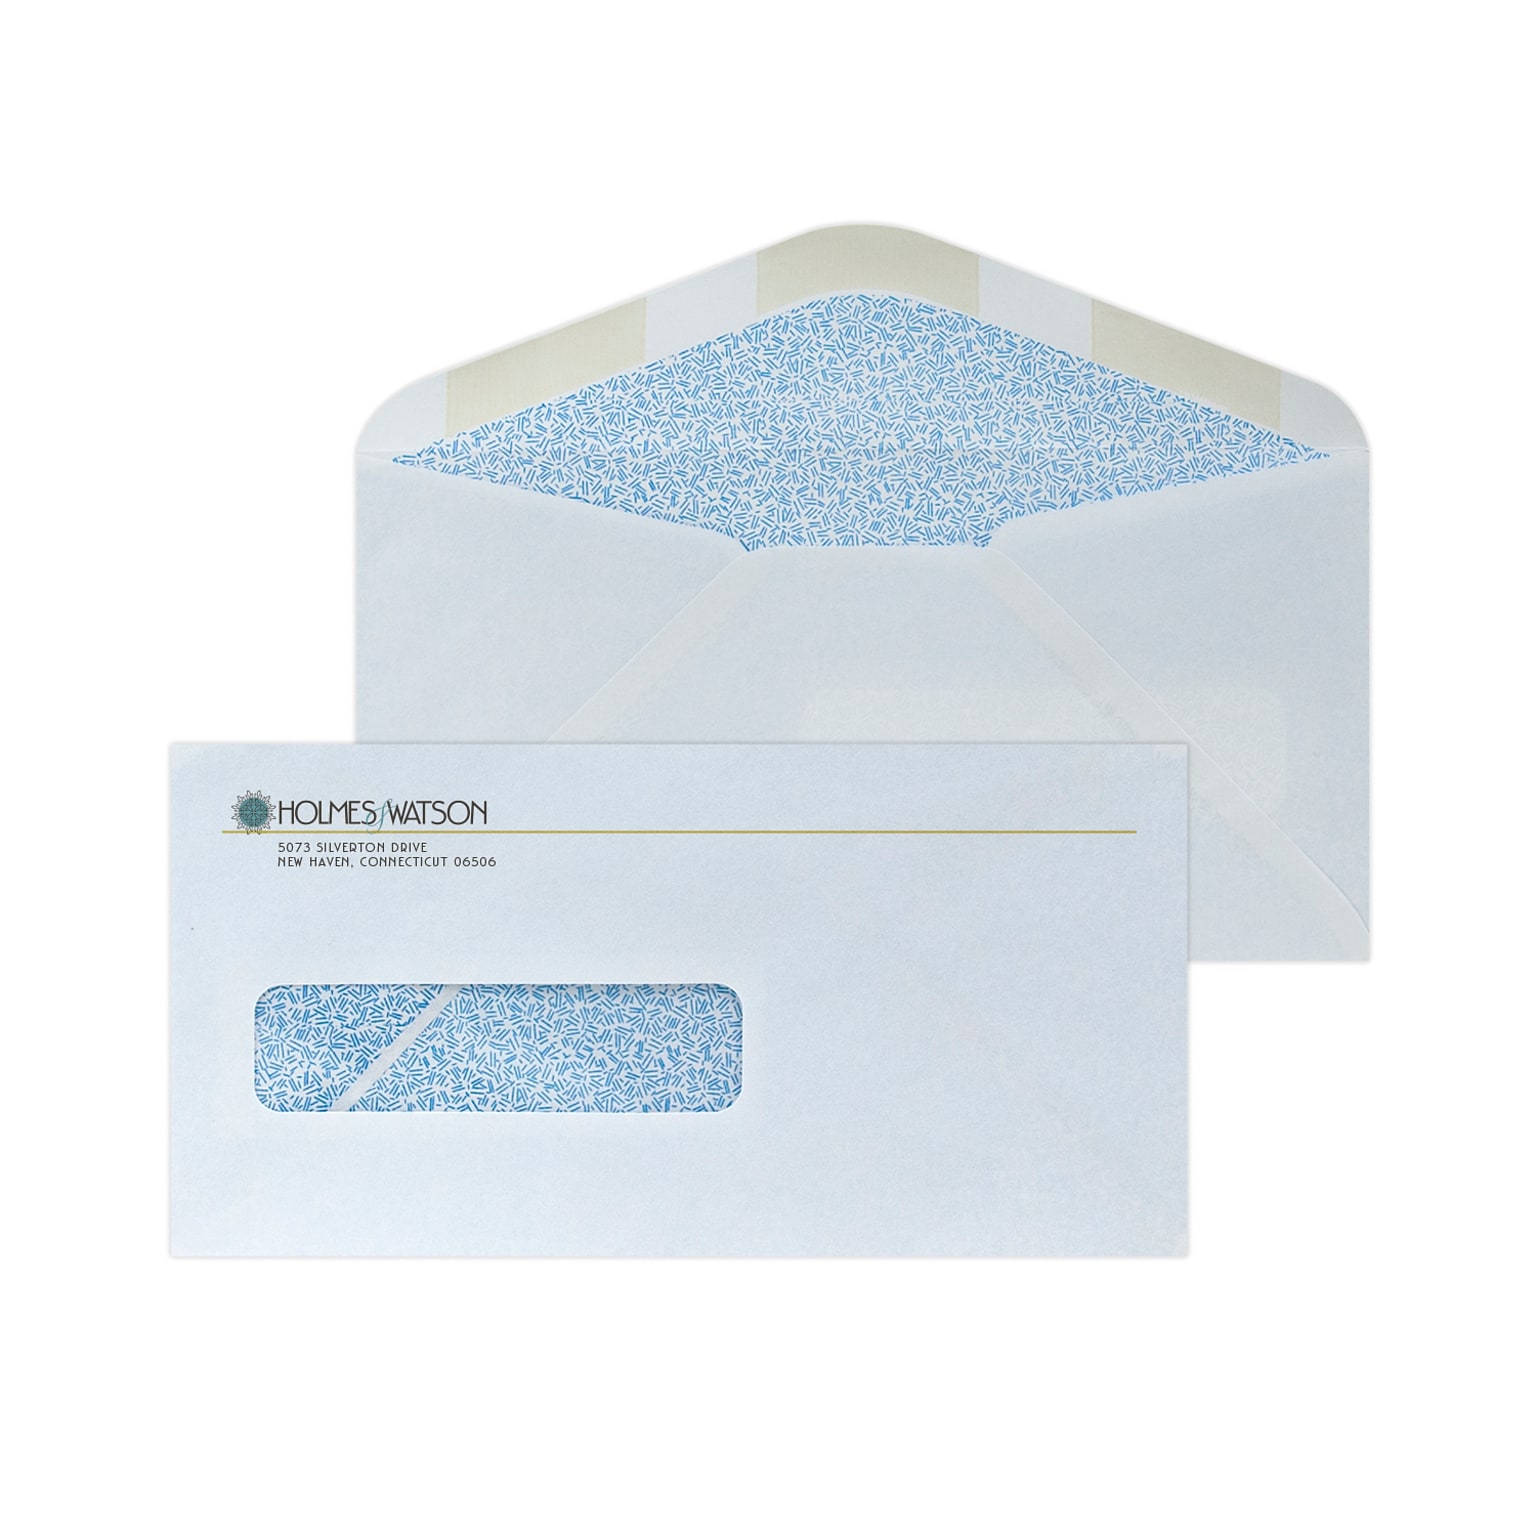 Custom Full Color 4-1/2 x 9 Insurance Claim Left Window Envelopes with Security Tint, 24# White Wove, 250 / Pack